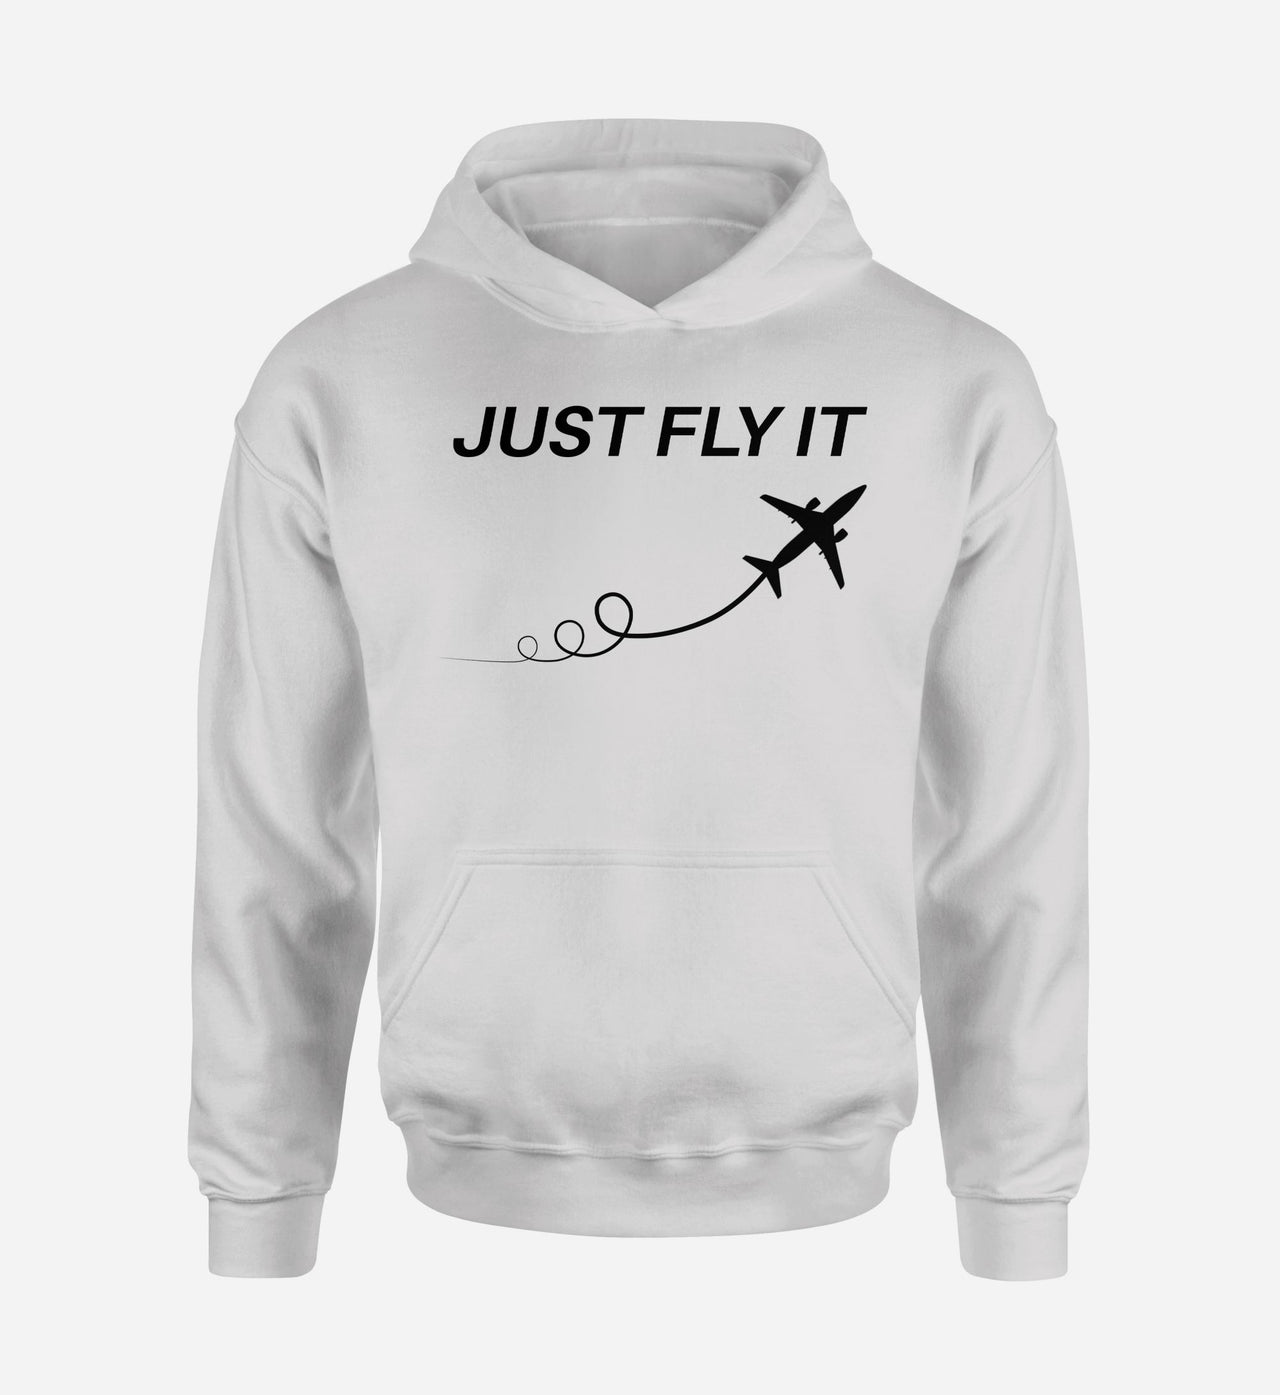 Just Fly It Designed Hoodies